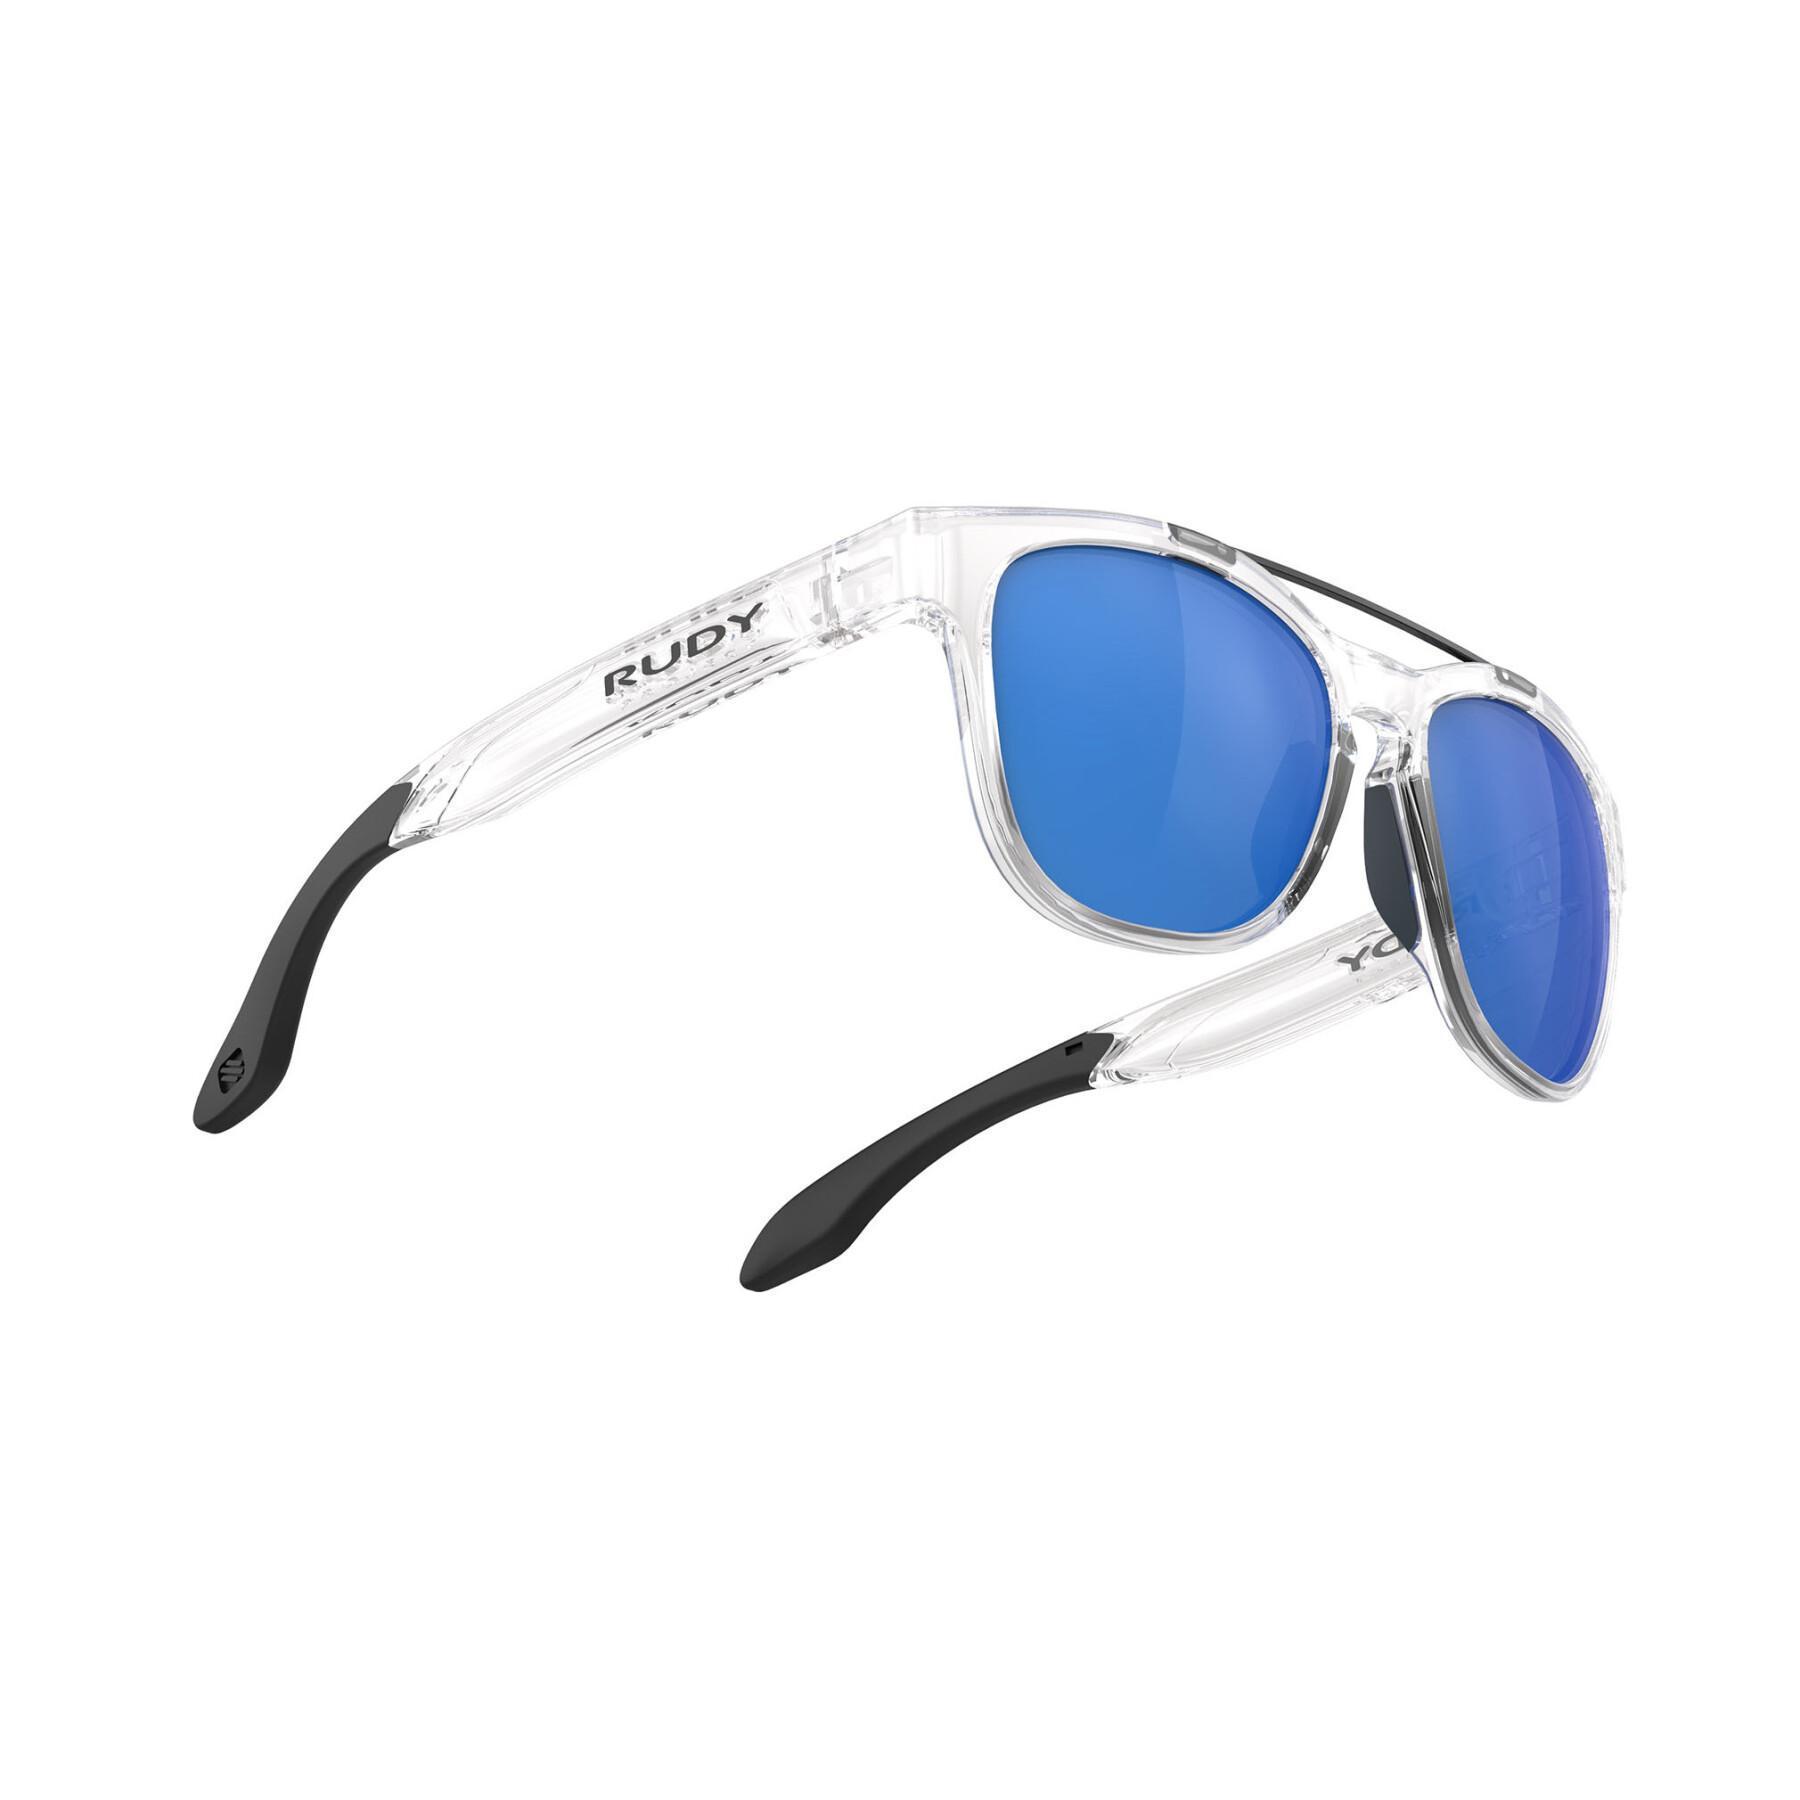 Sunglasses Rudy Project spinair 59